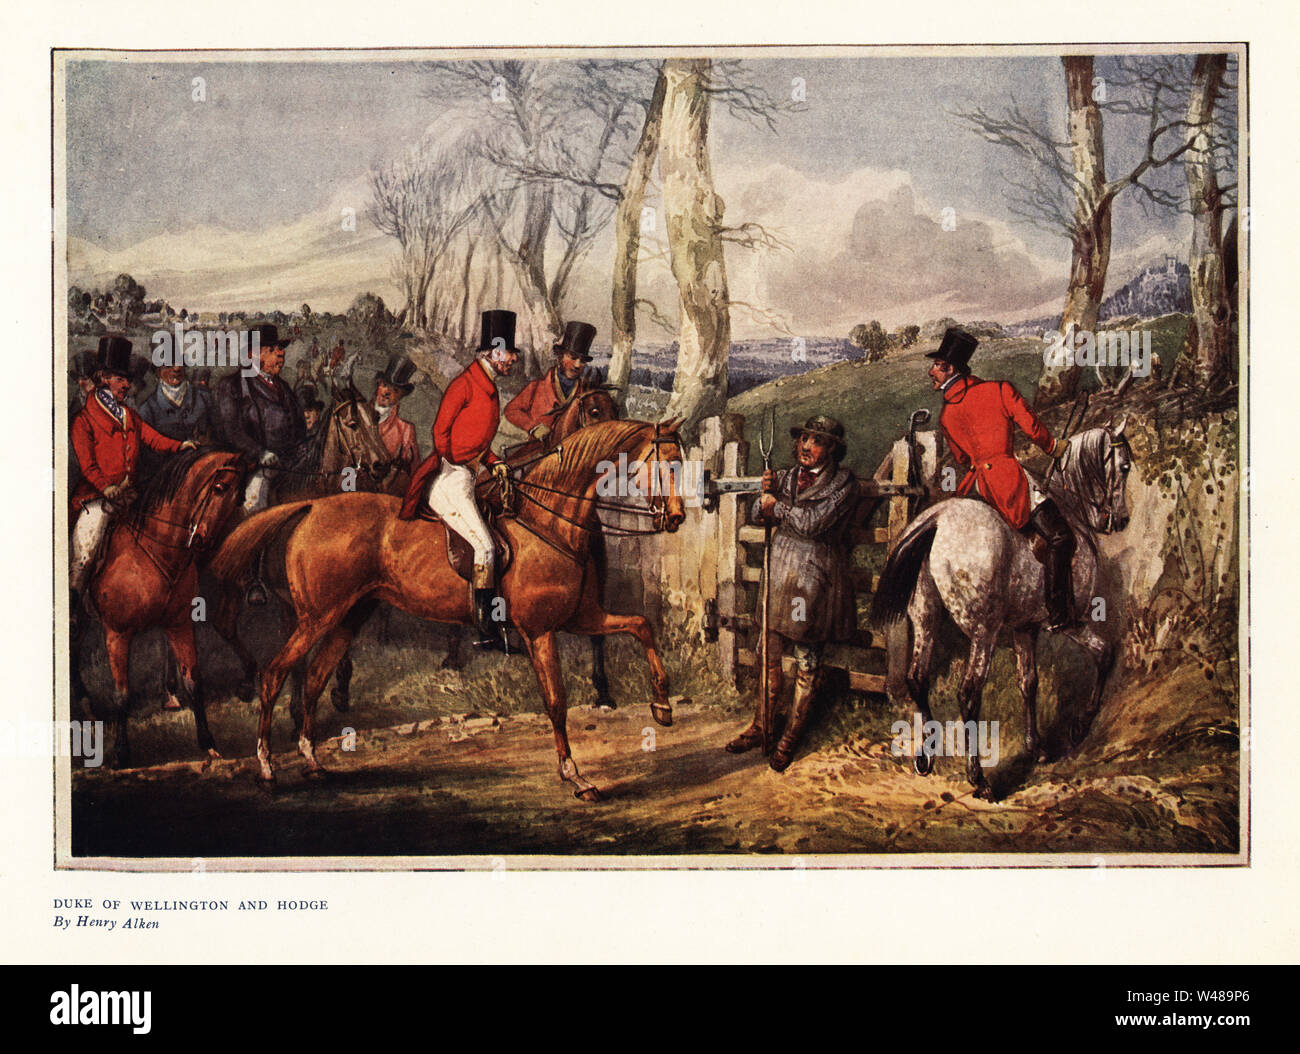 The Duke of Wellington and Hodge. Arthur Wellesley, the victor of Waterloo, talking to groundkeeper Hodge during a fox hunt. Color print after a drawing by Henry Alken in Ralph Nevill’s Old Sporting Prints, The Connoisseur Magazine, London, 1908. Stock Photo